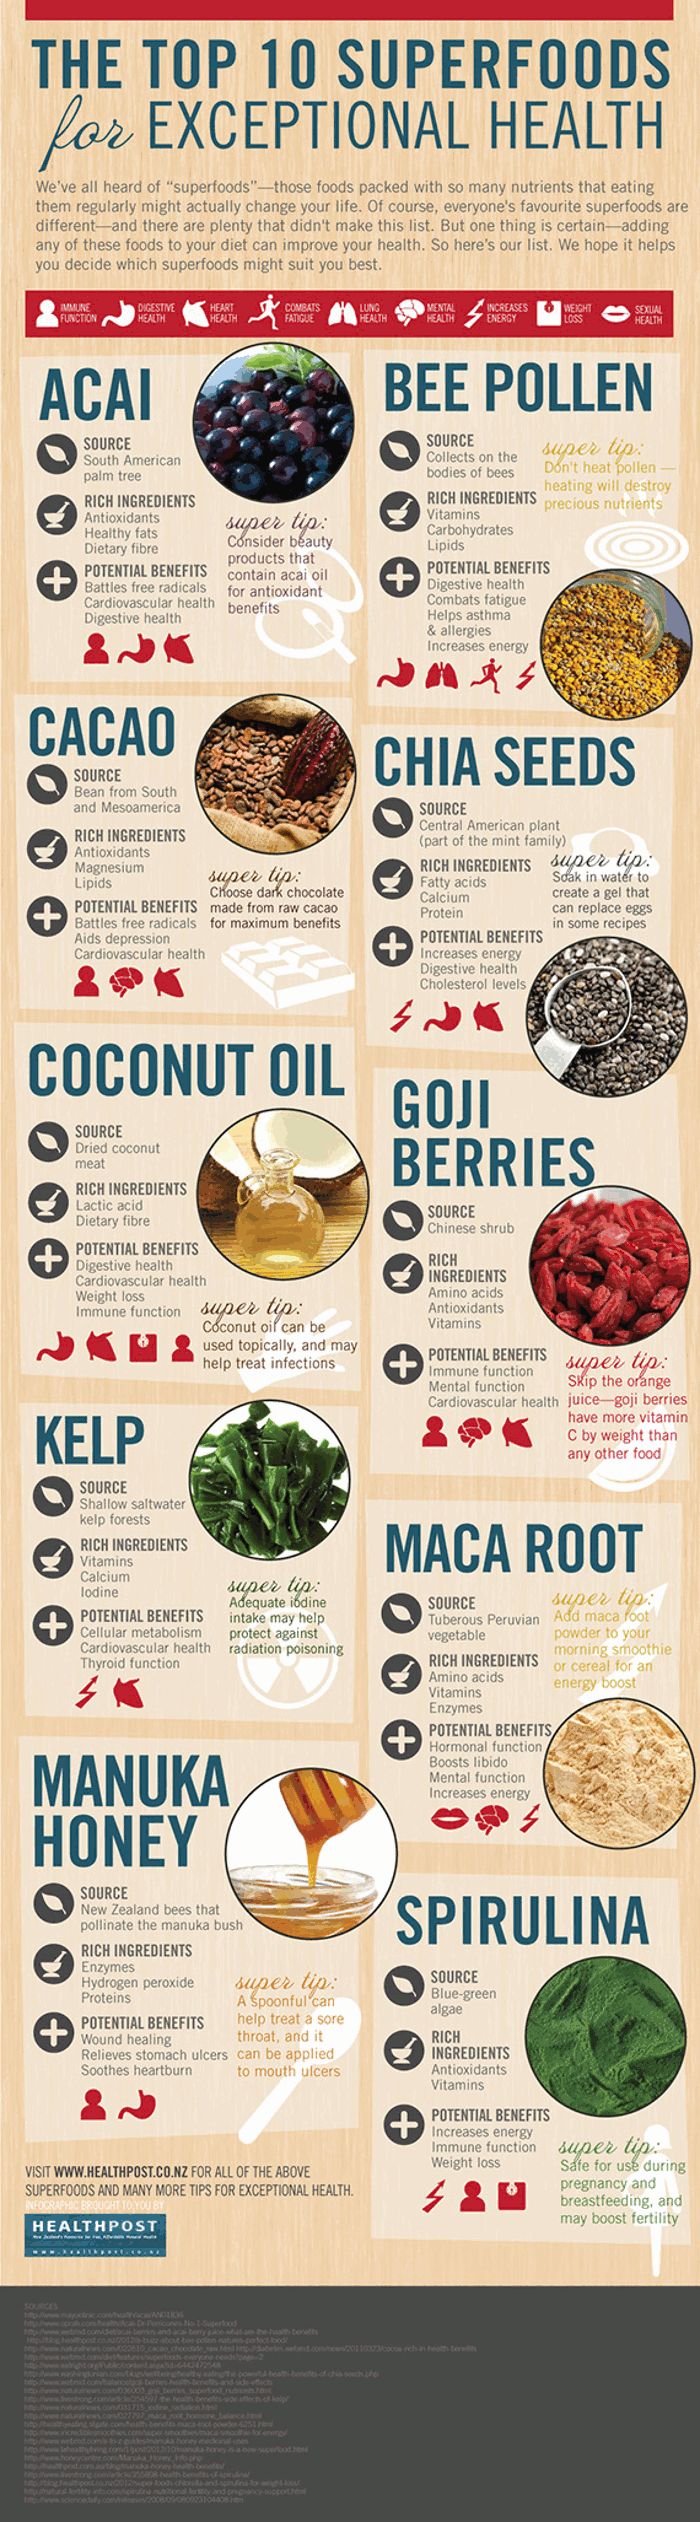 The Top 10 Superfoods For Exceptional Health